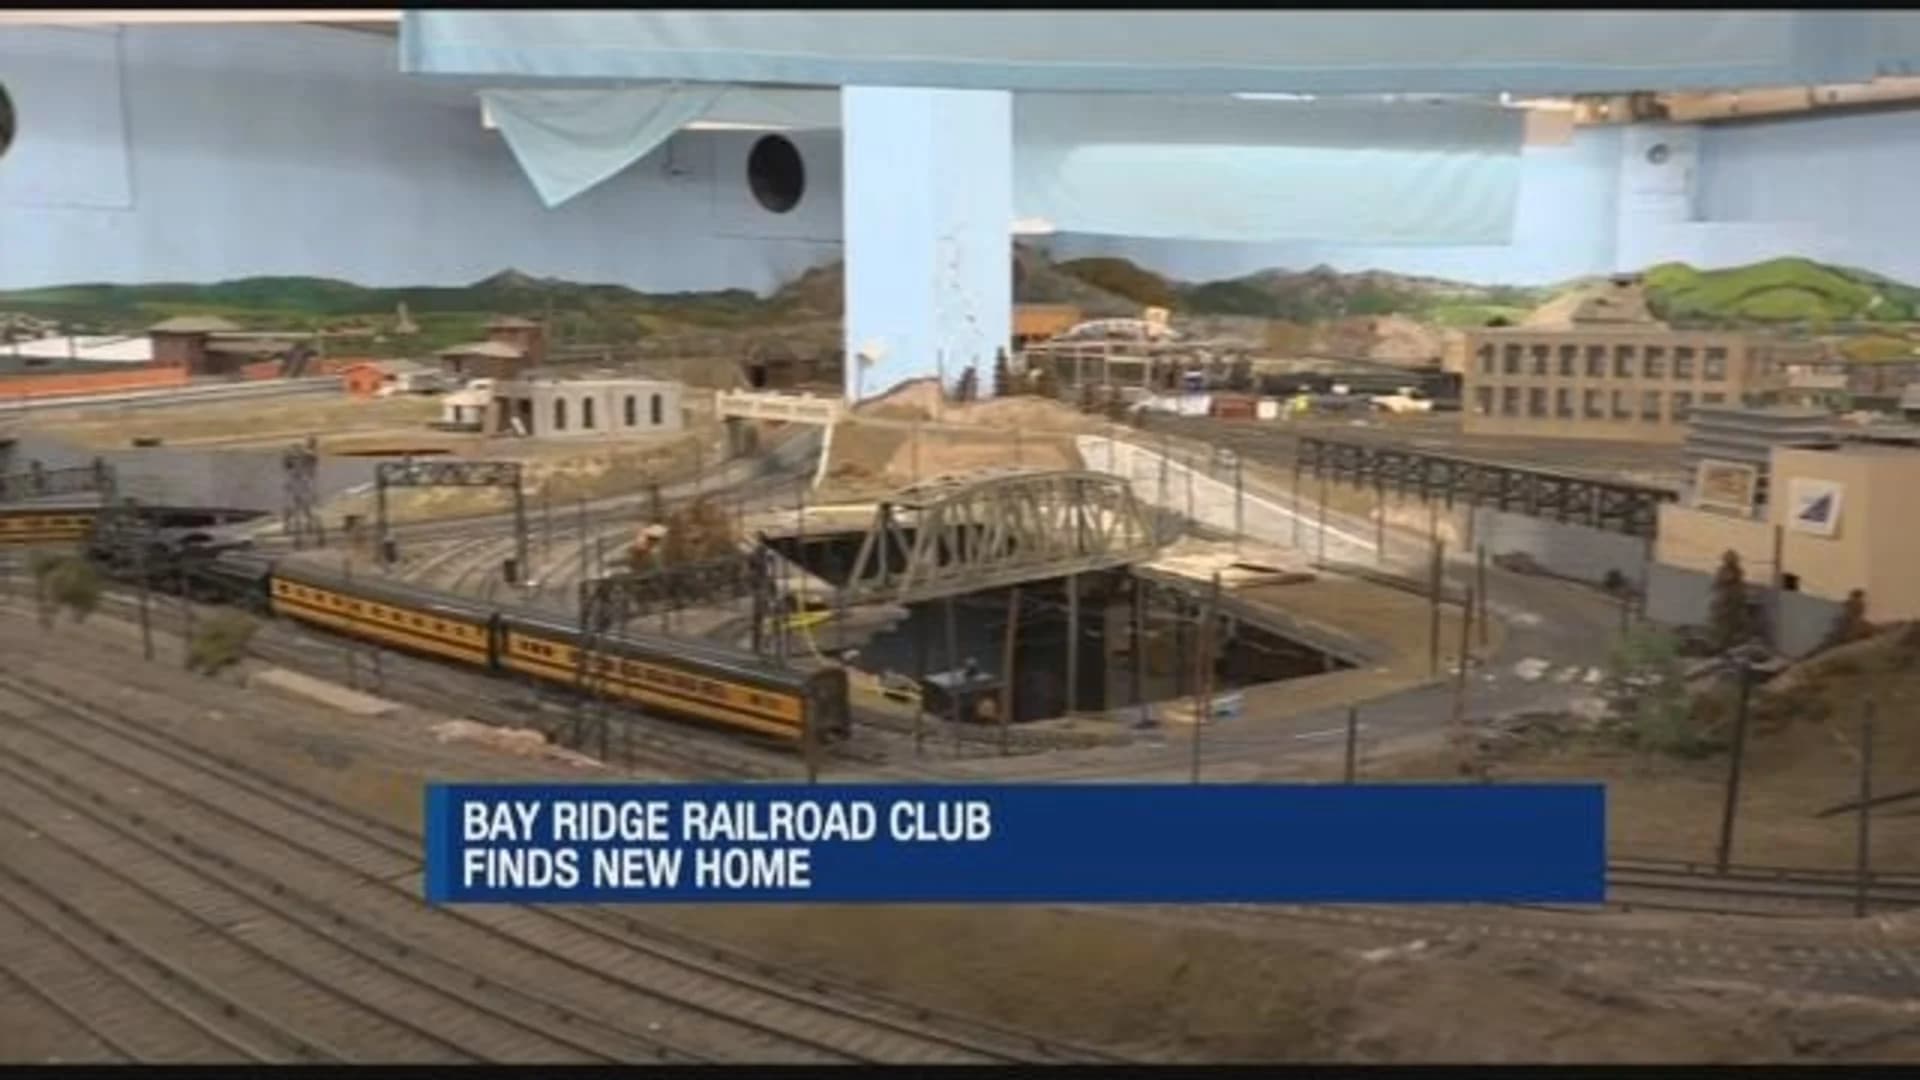 Model railroad club forced to leave Brooklyn after more than 70 years